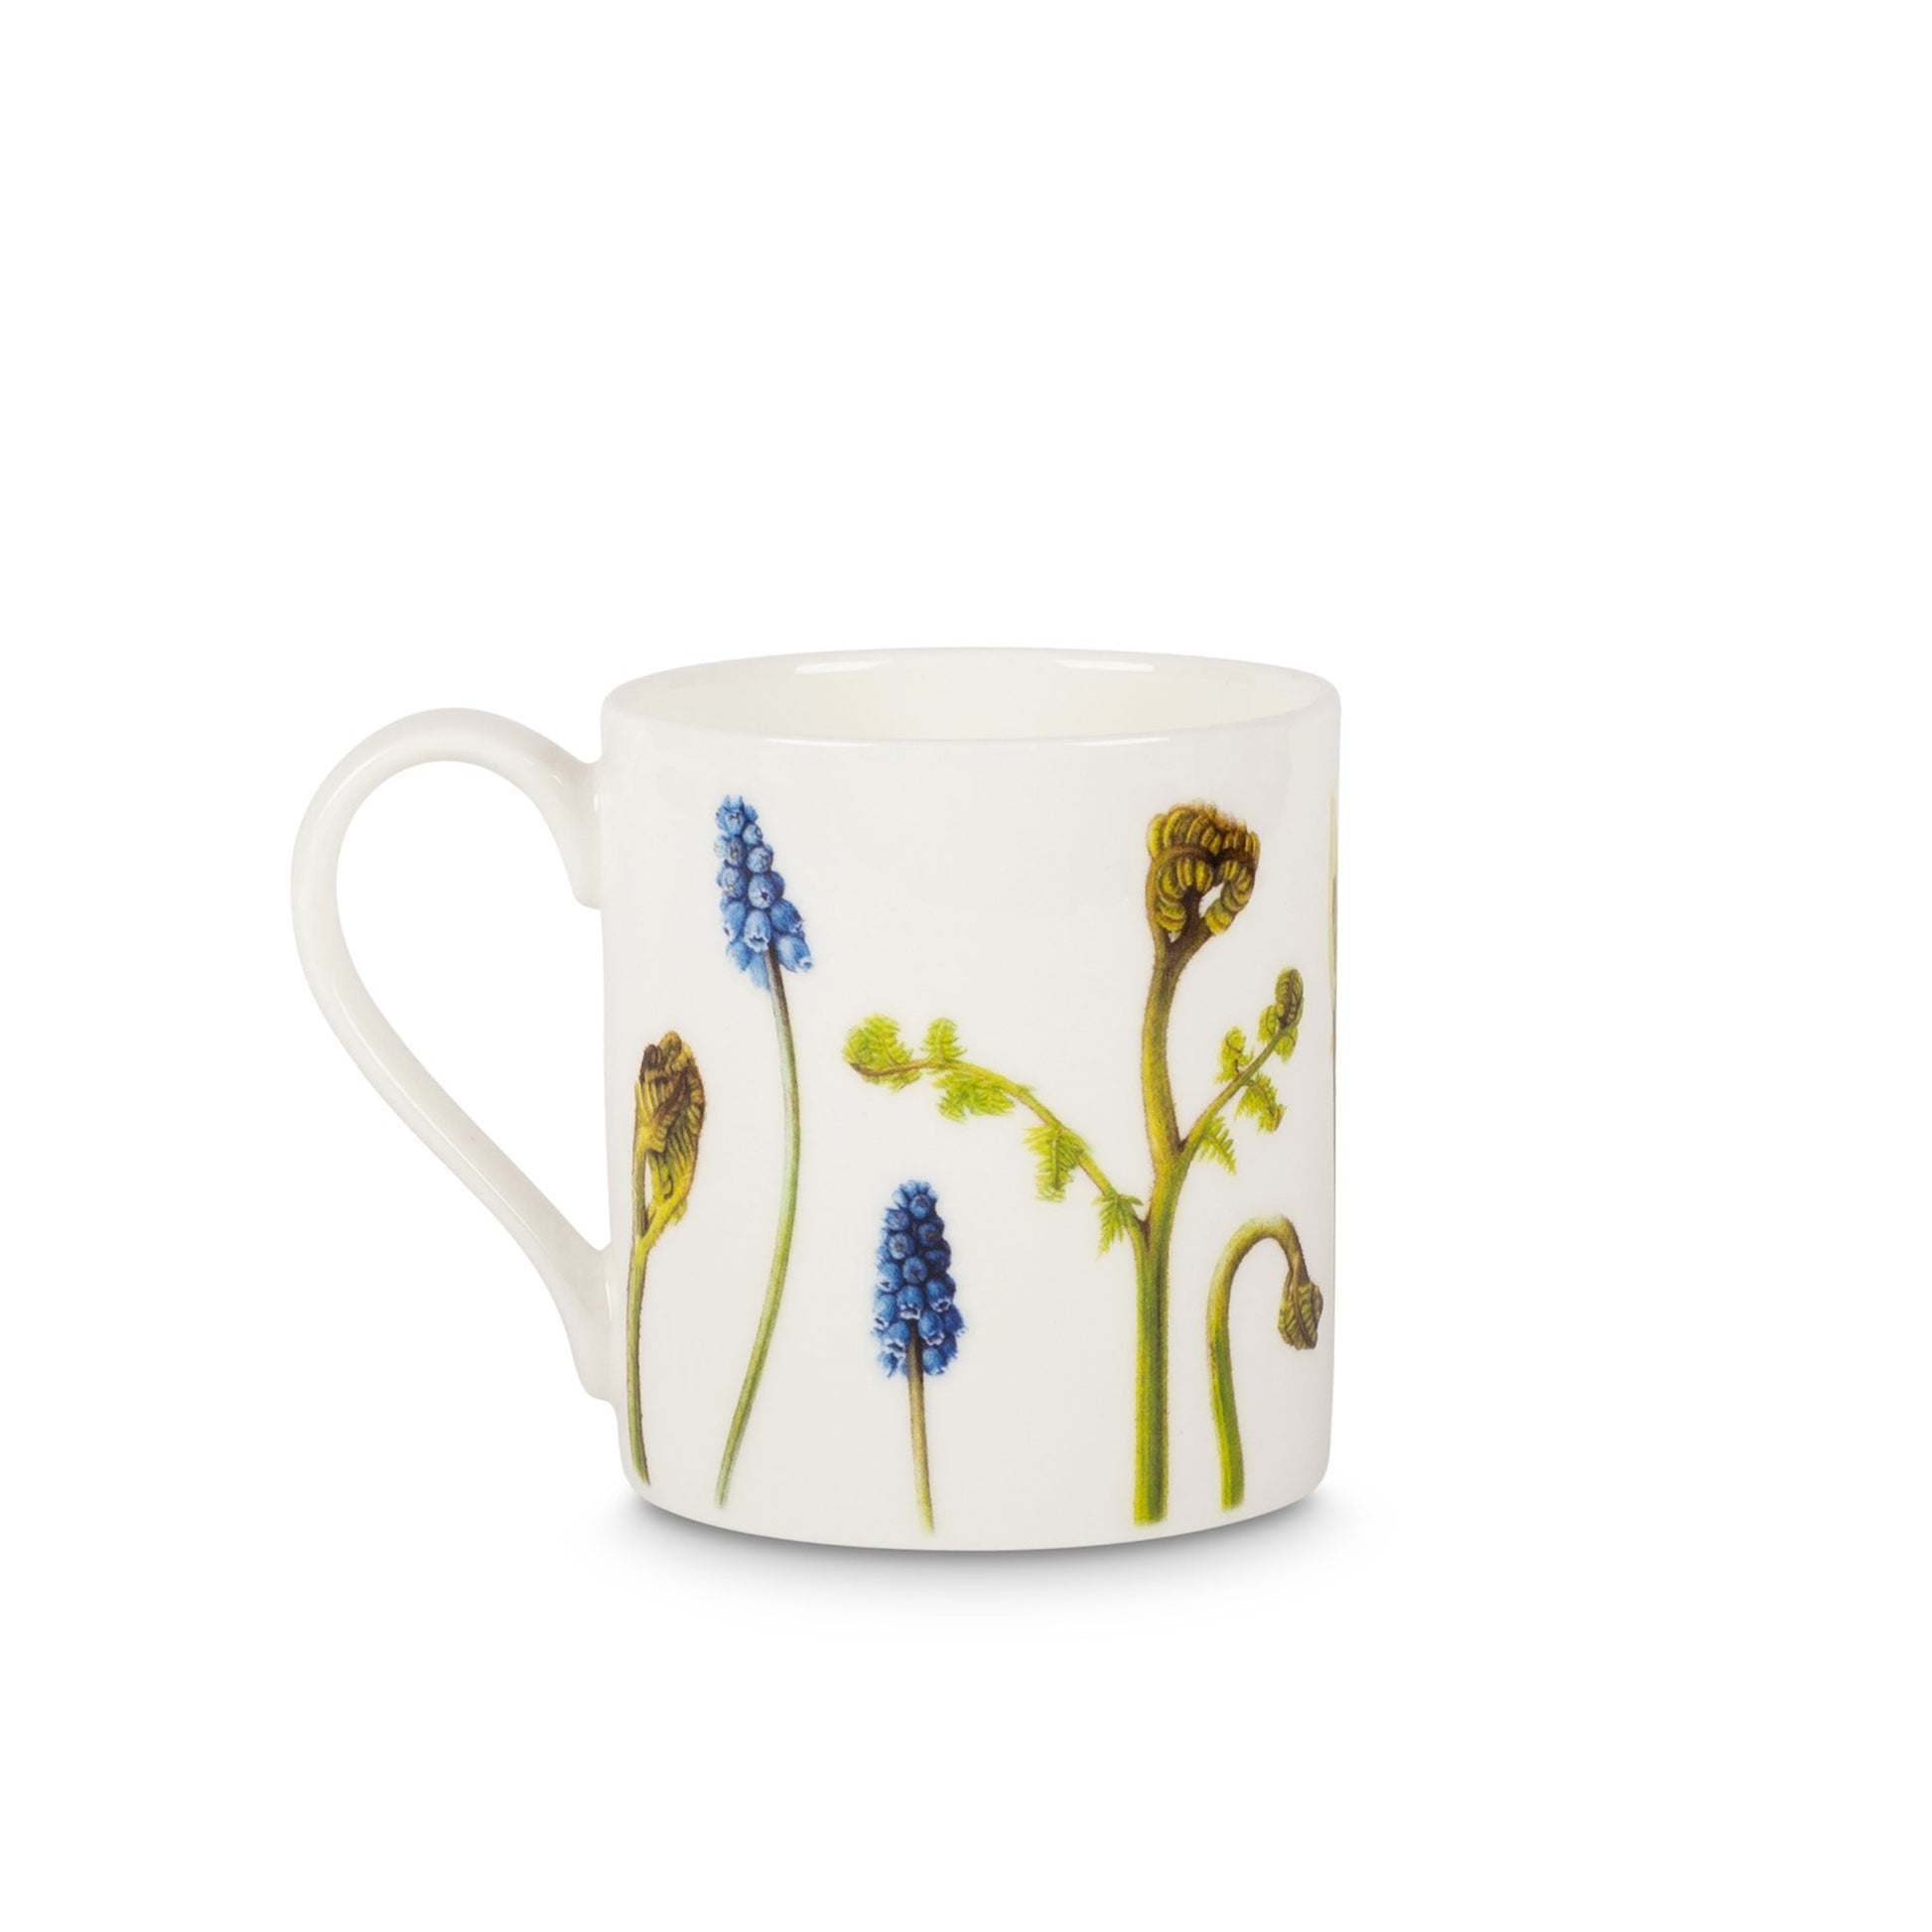 The other side of the mug showing more flowers in blue and green.